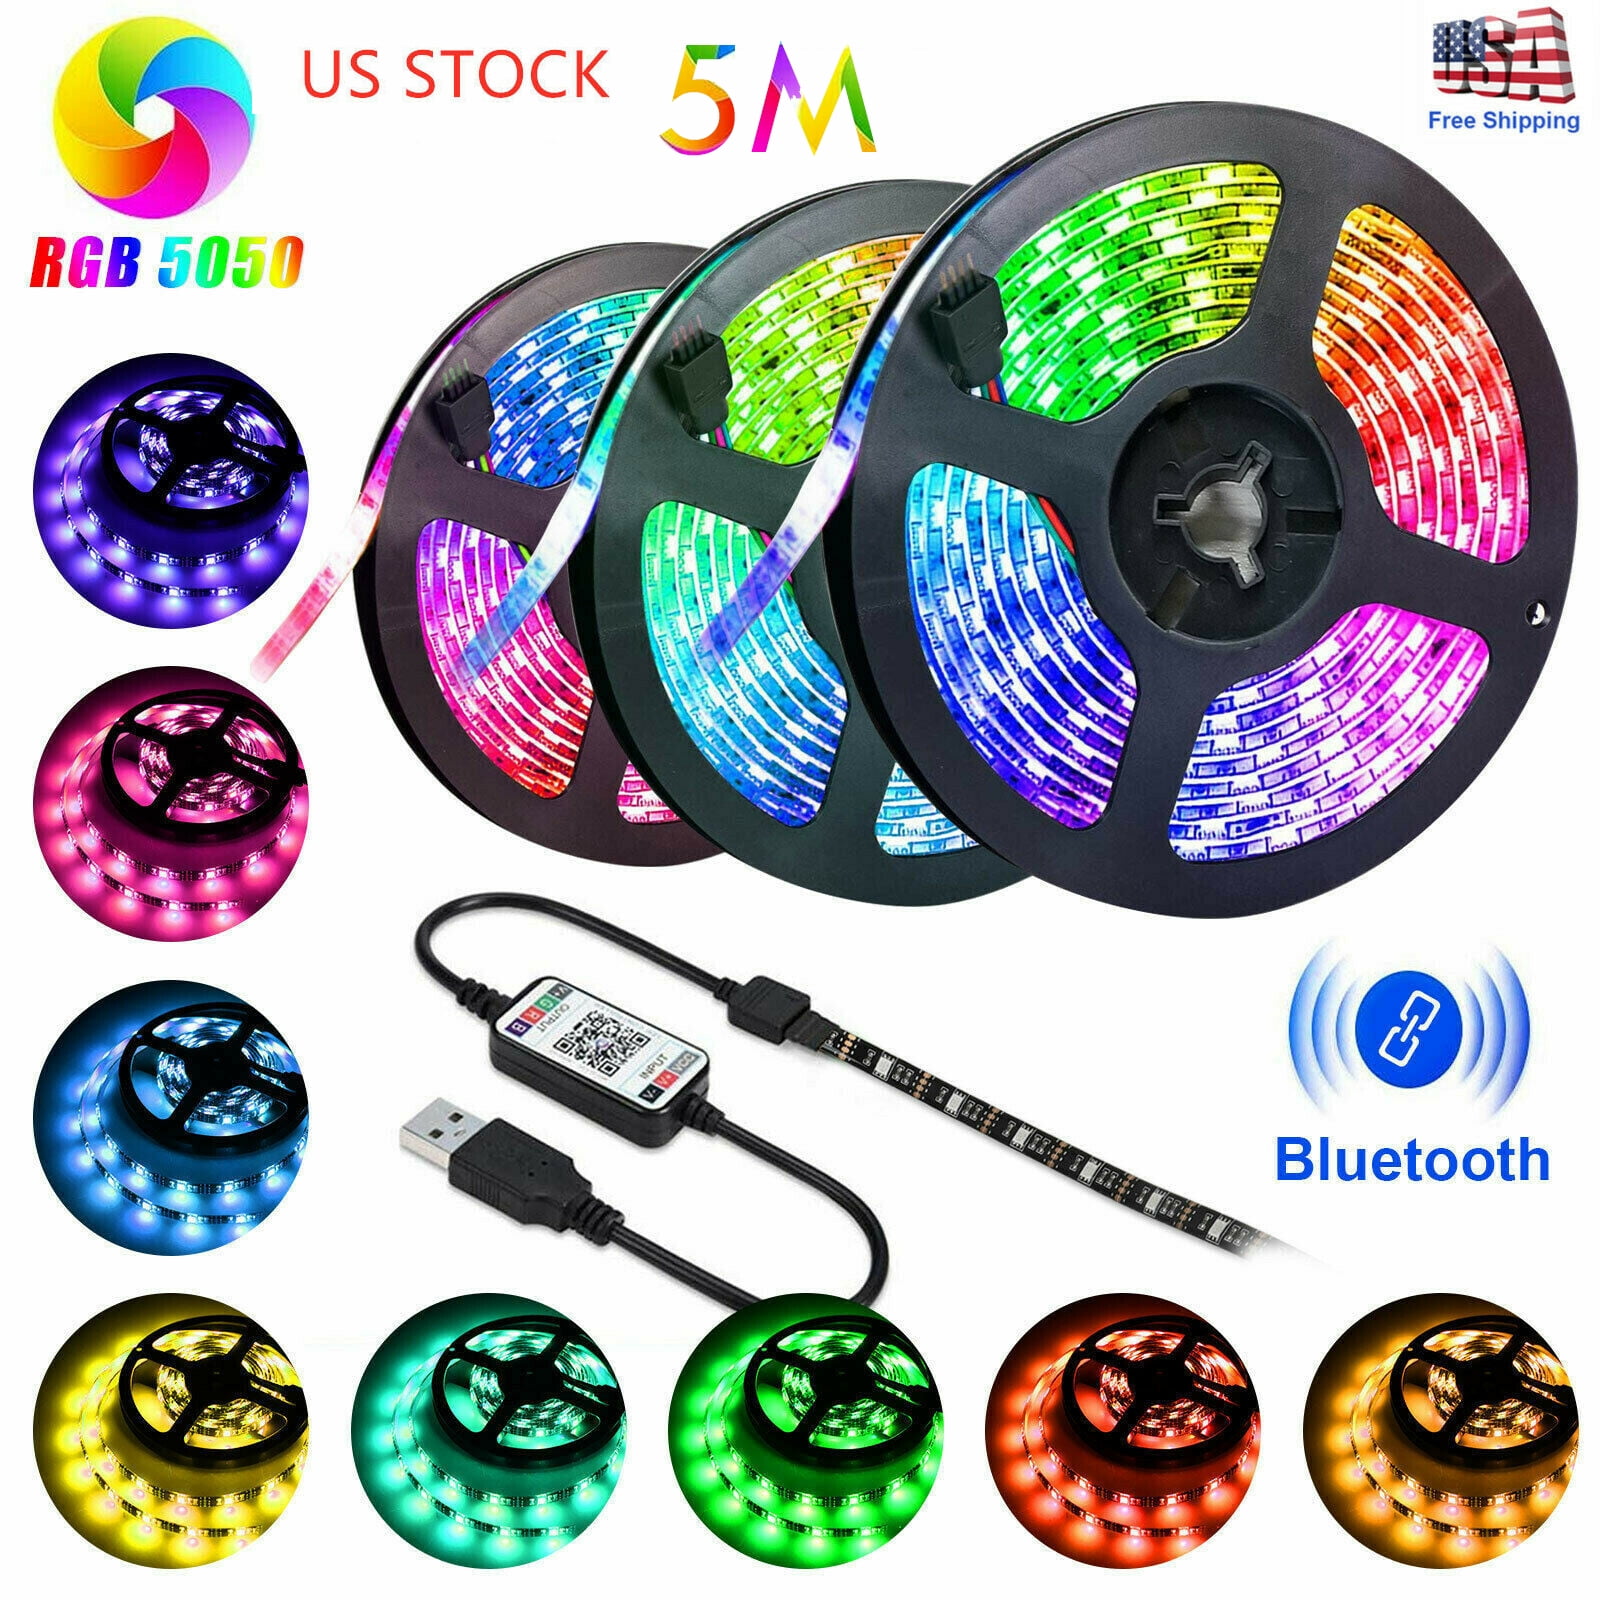 Details about   TV Backlight USB Powered LED Strip Light RGB5050 24 Inch-60 Inch Mirror PC APP 